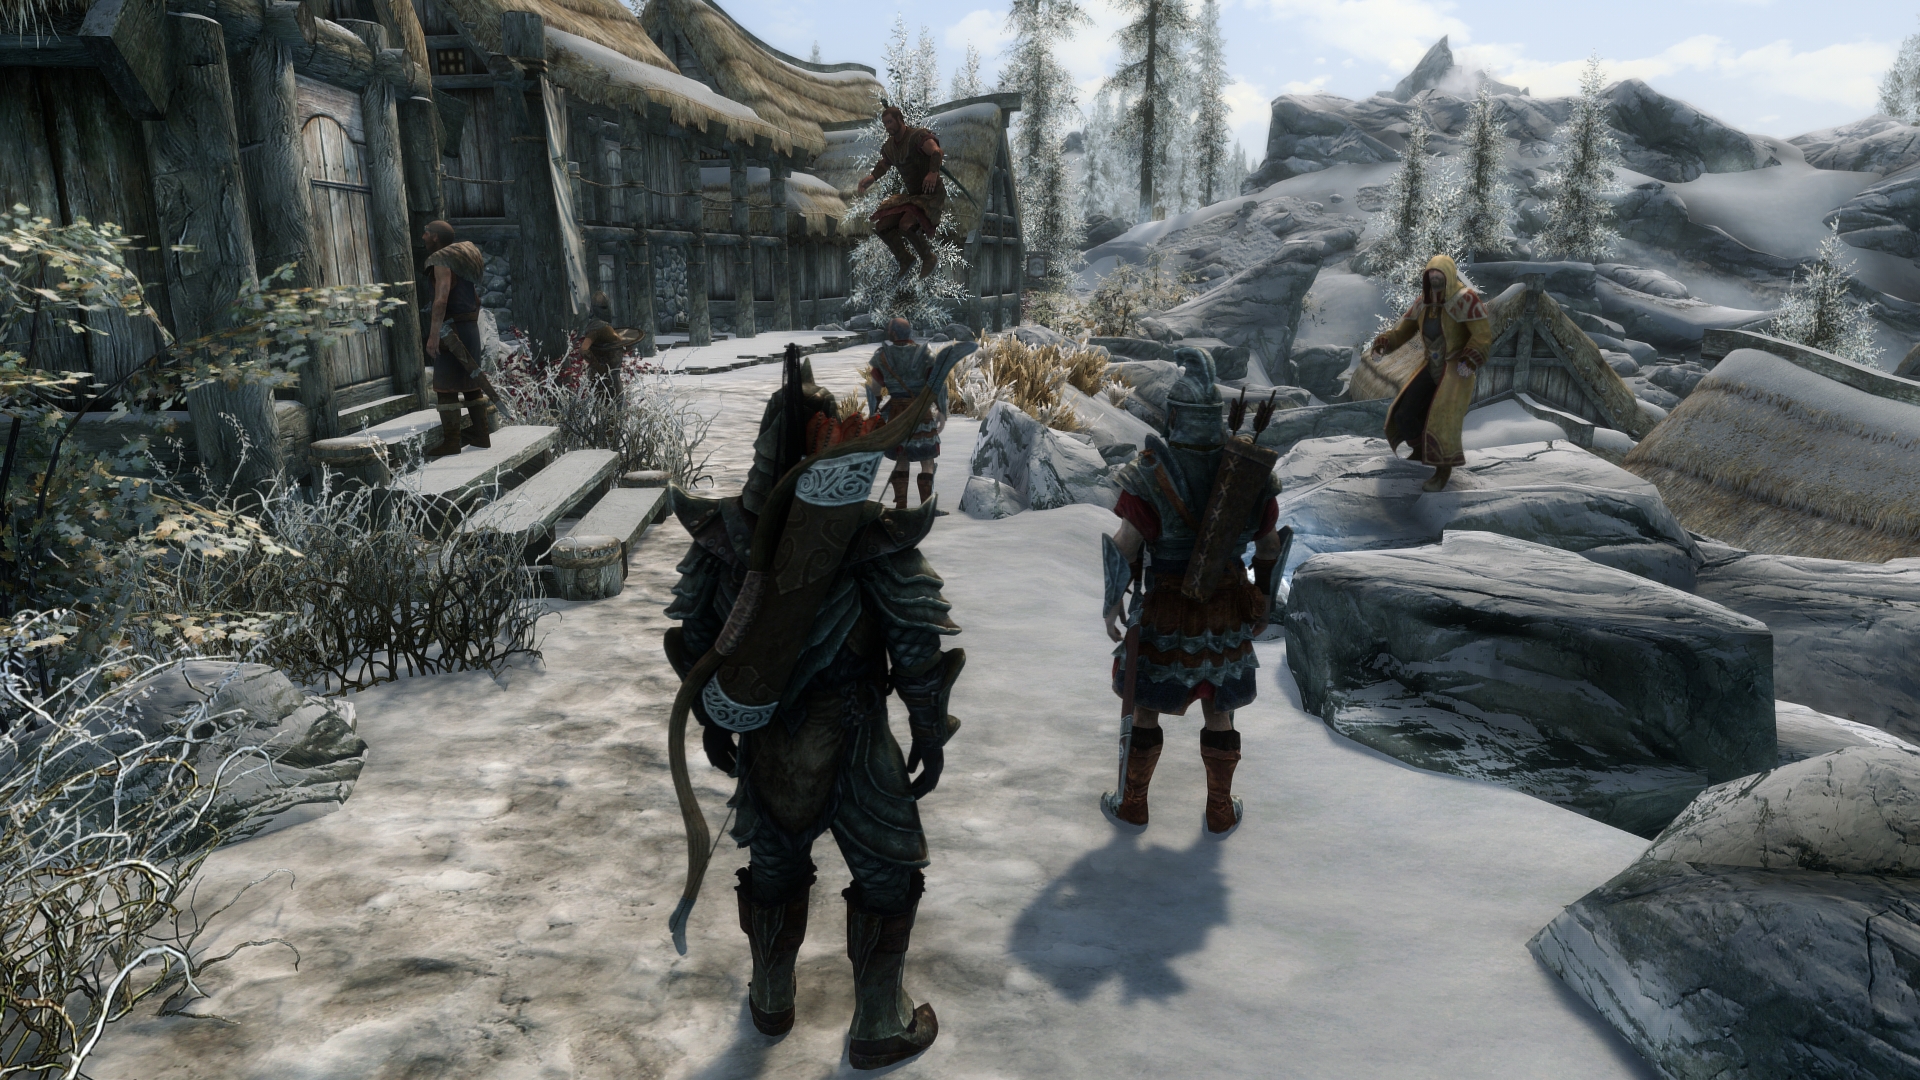 Tamriel Online is a mod aiming to bring co-op to Skyrim